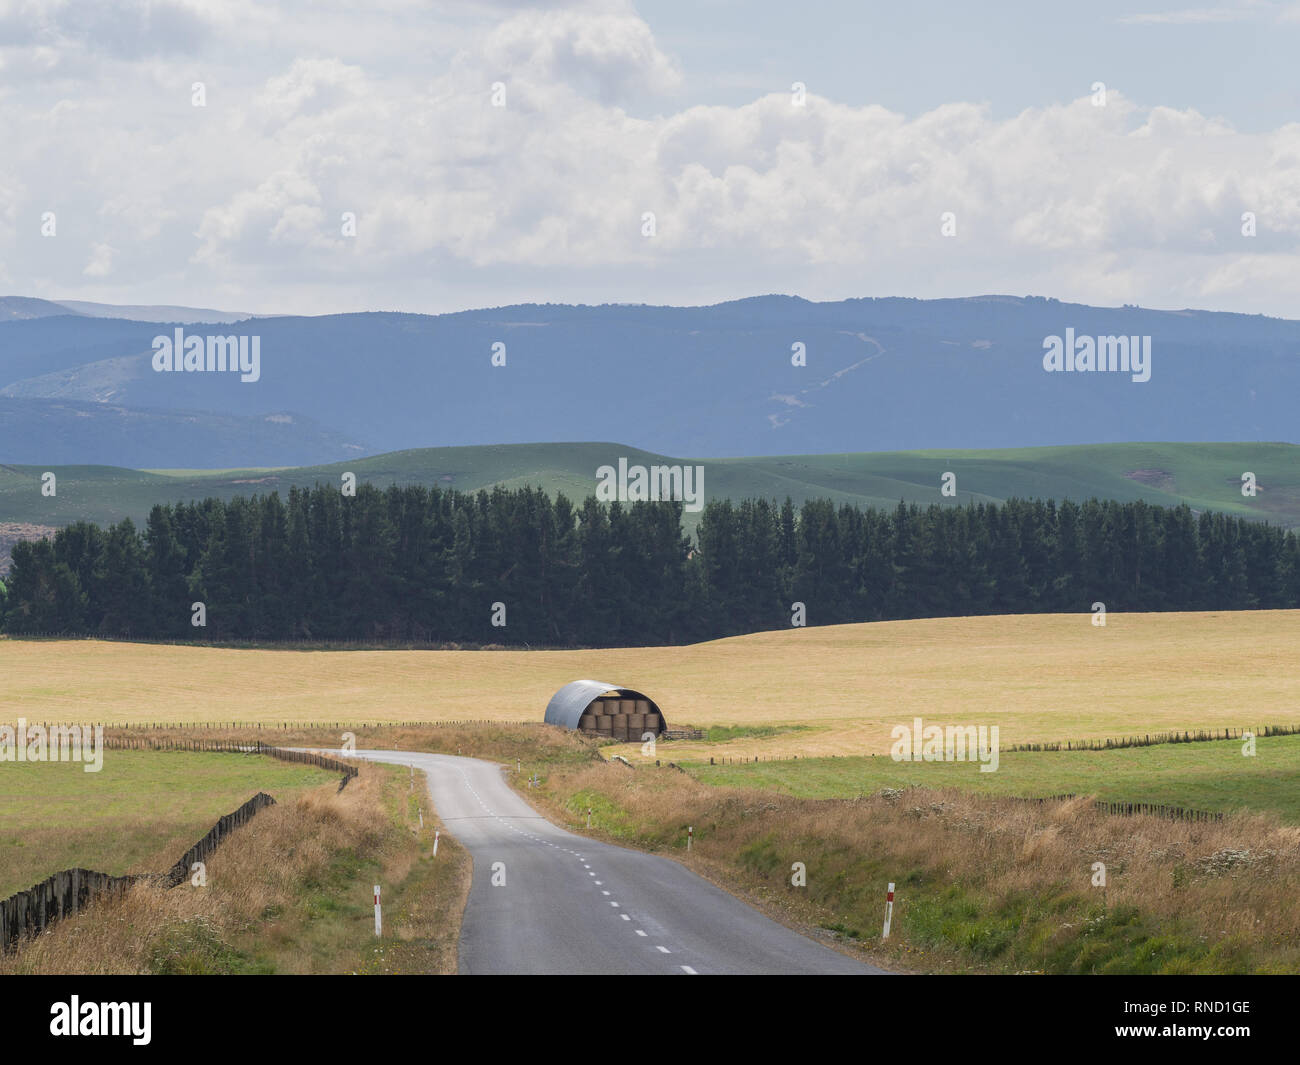 Hay barn in a brown grass field, a row of dark pines, hills on the horizon, Taihape Napier Road, Inland Mokai Patea, Central North Island New Zealand Stock Photo